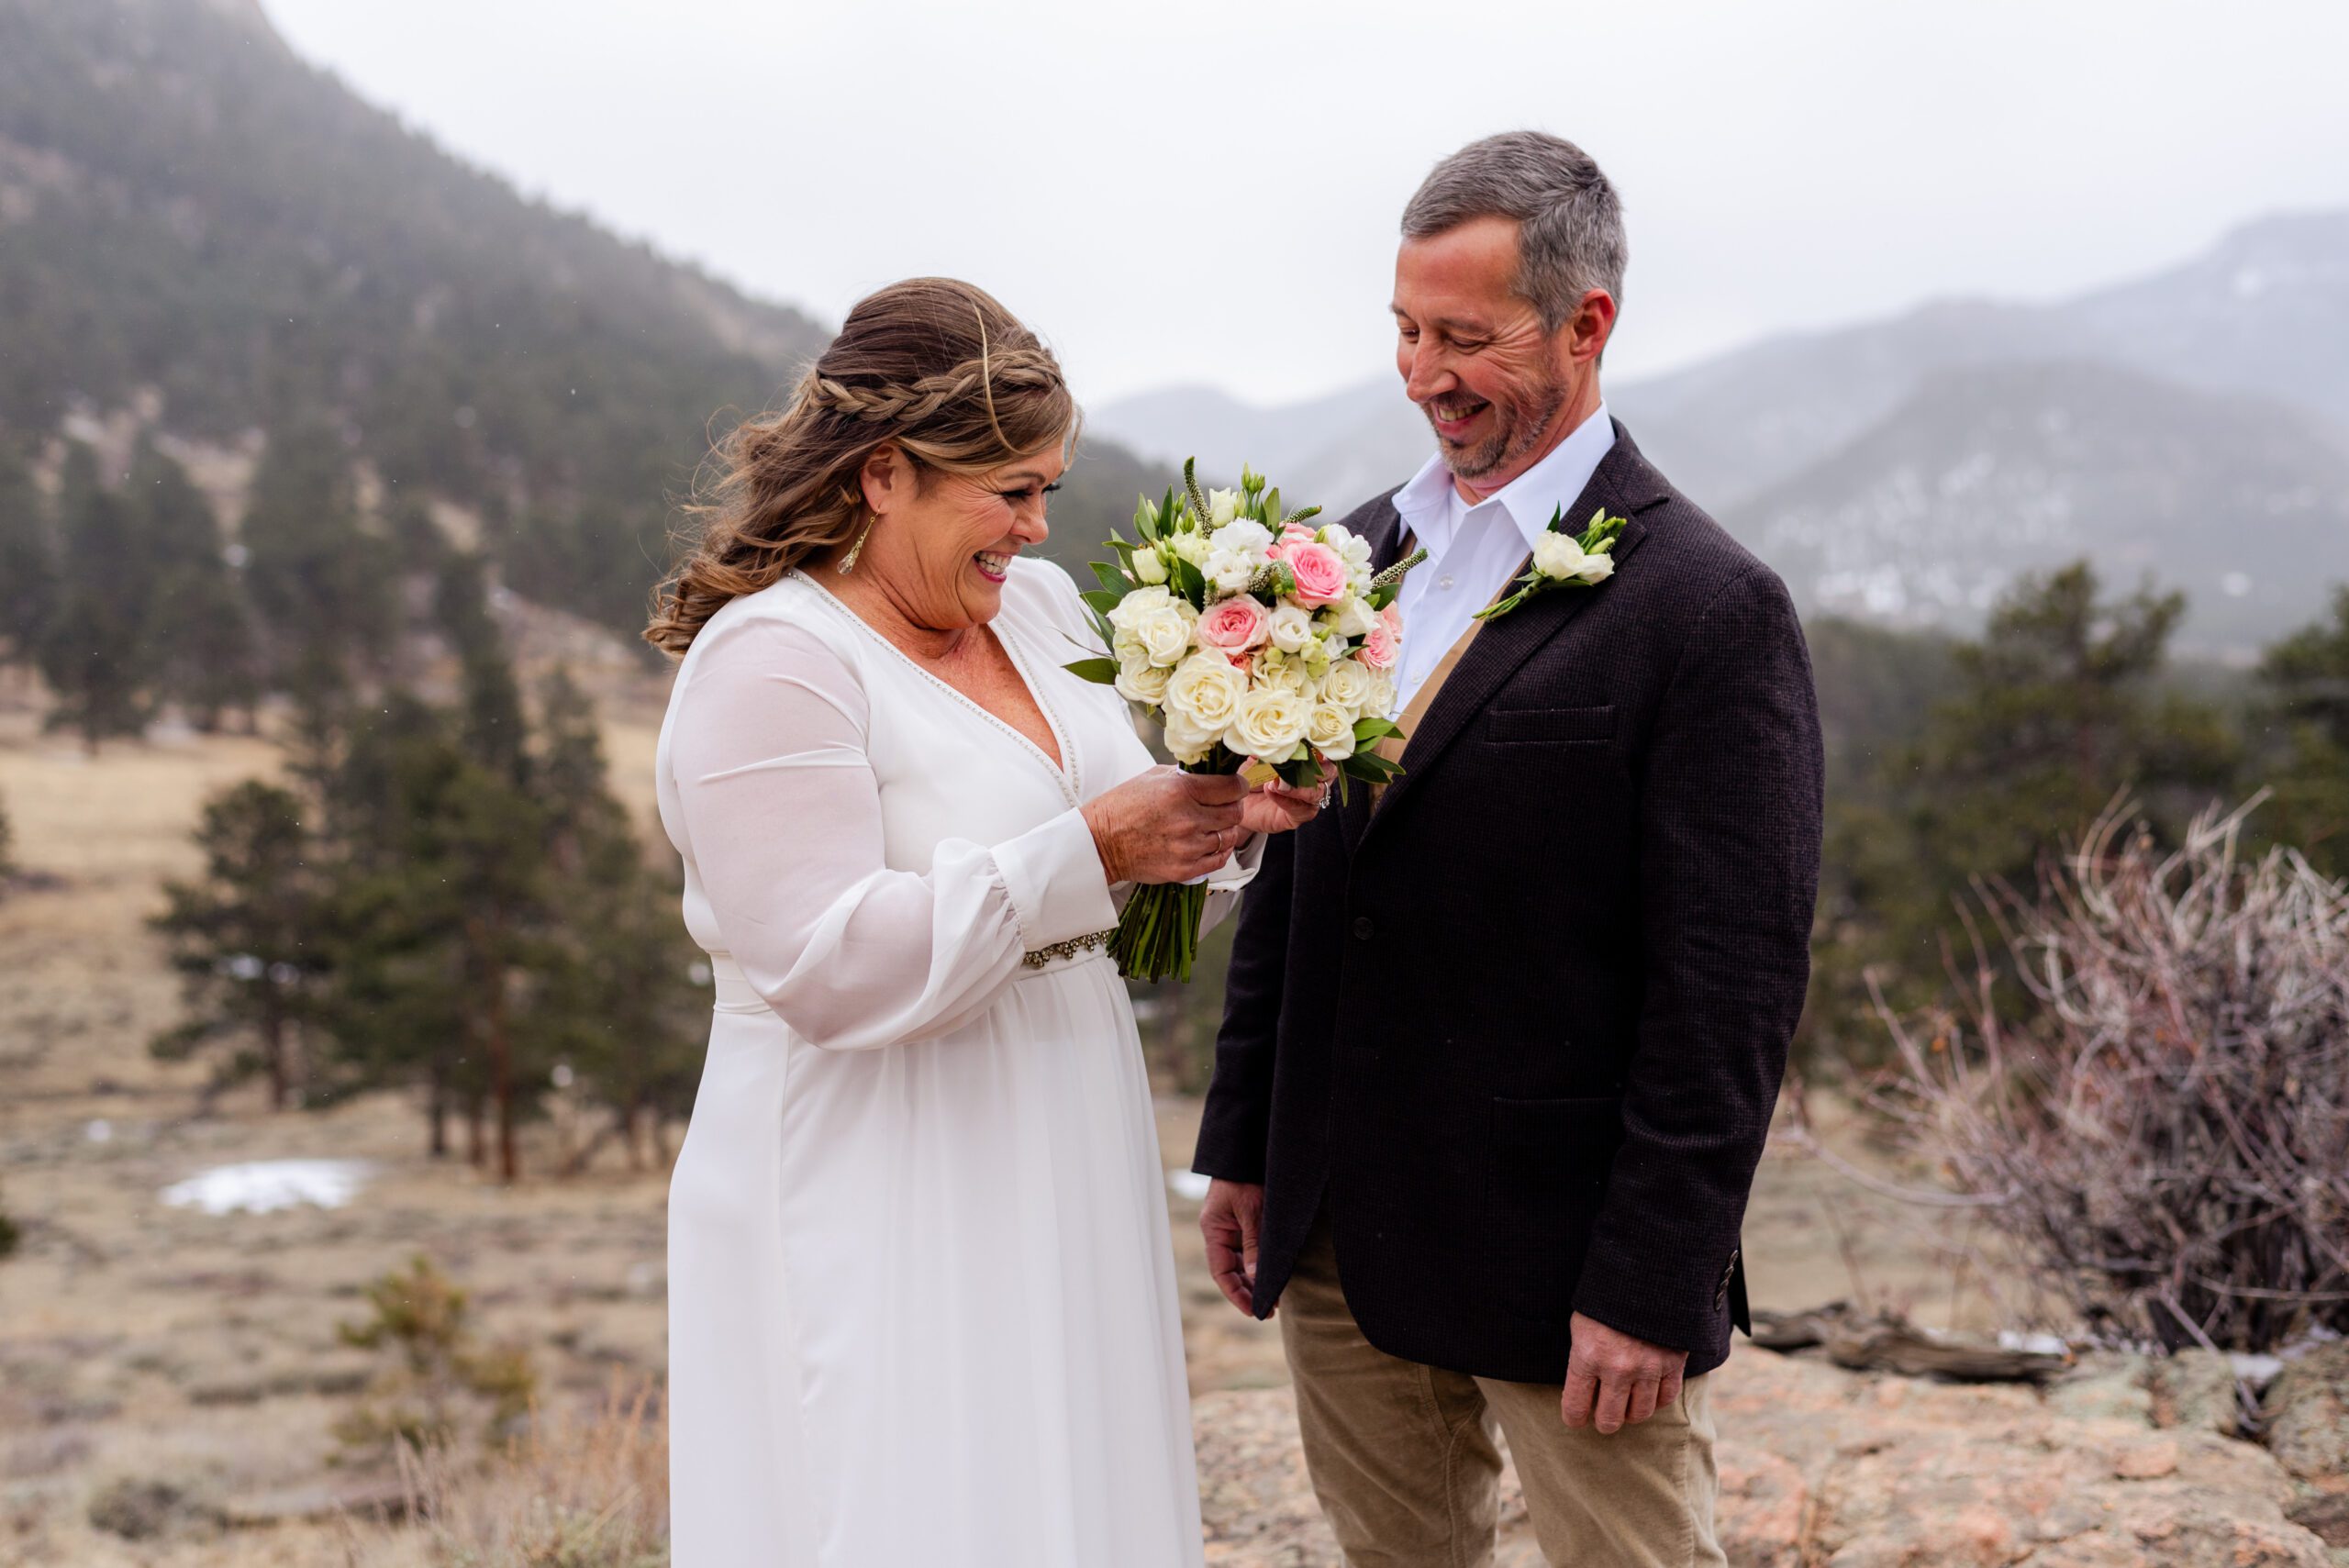 the bride smiles with excitement and joy during their spring elopement at 3M Curve.